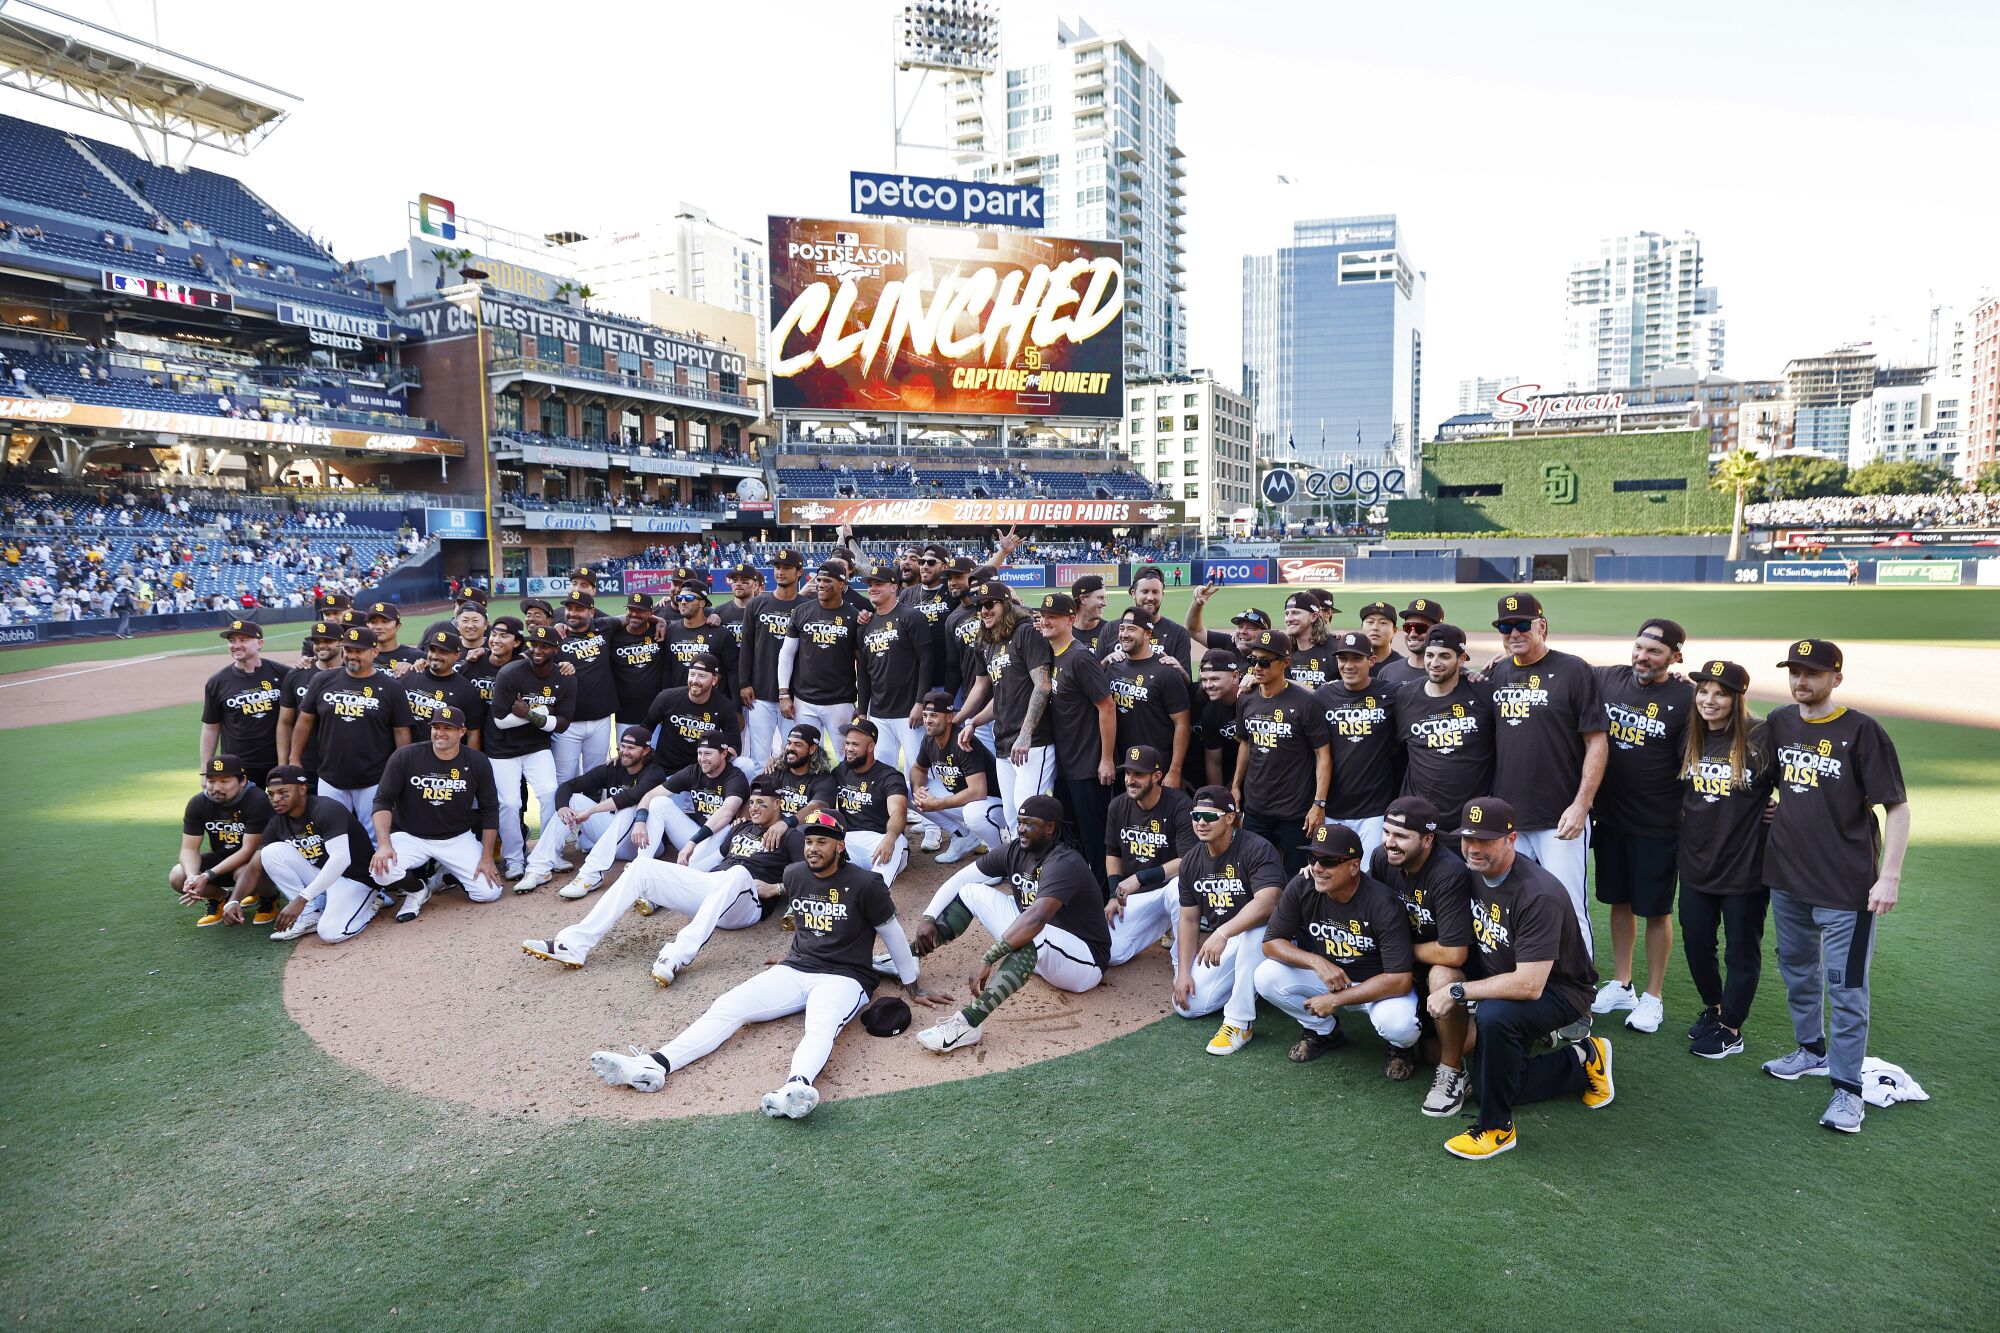 The Padres posed for a photo on the mound at Petco Park after the team clinched a wildcard playoff spot.